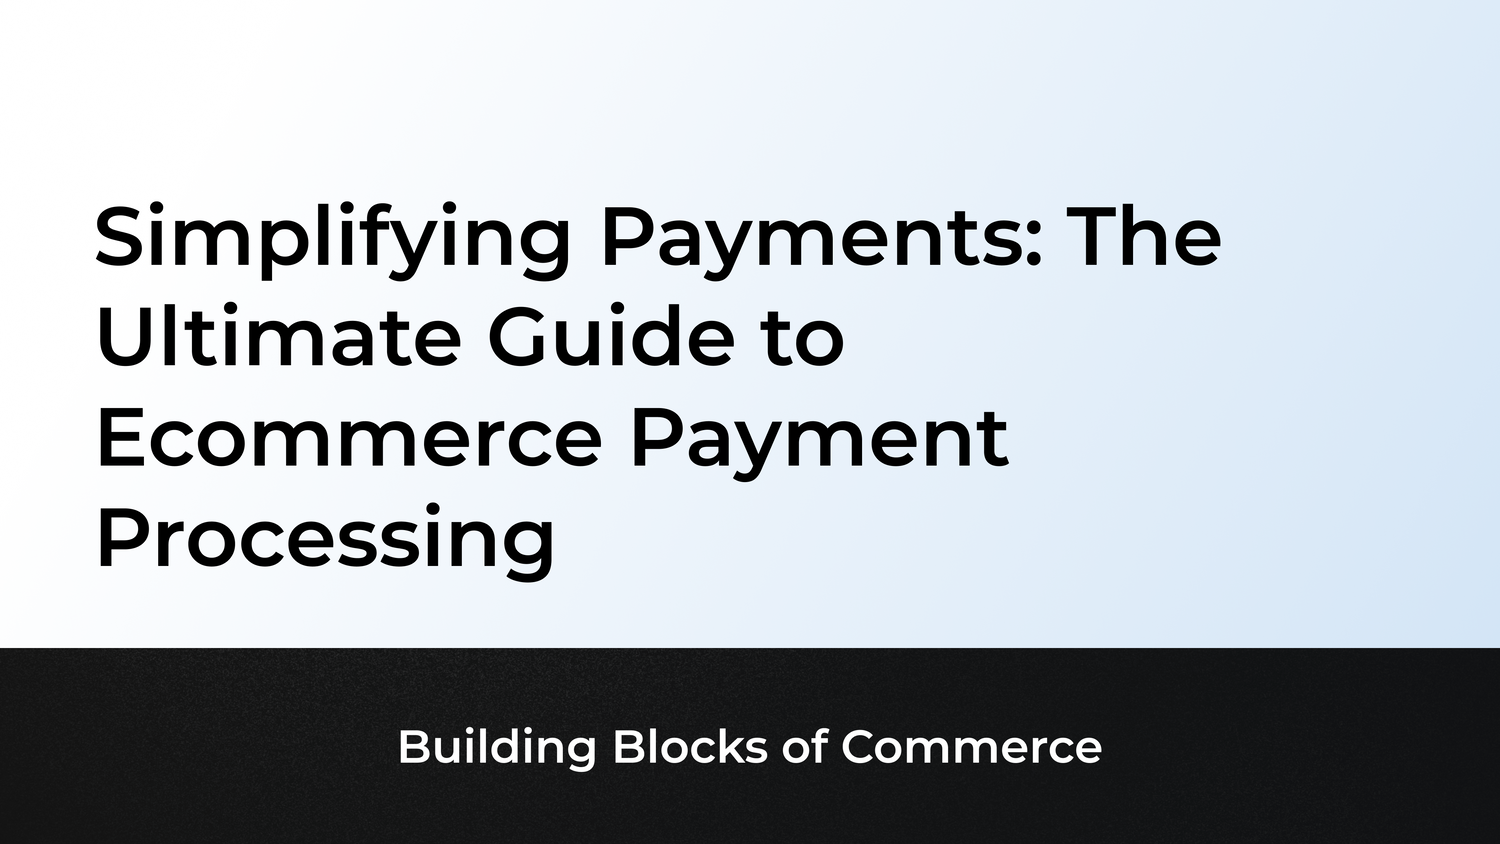 Simplifying Payments: The Ultimate Guide to Ecommerce Payment Processing